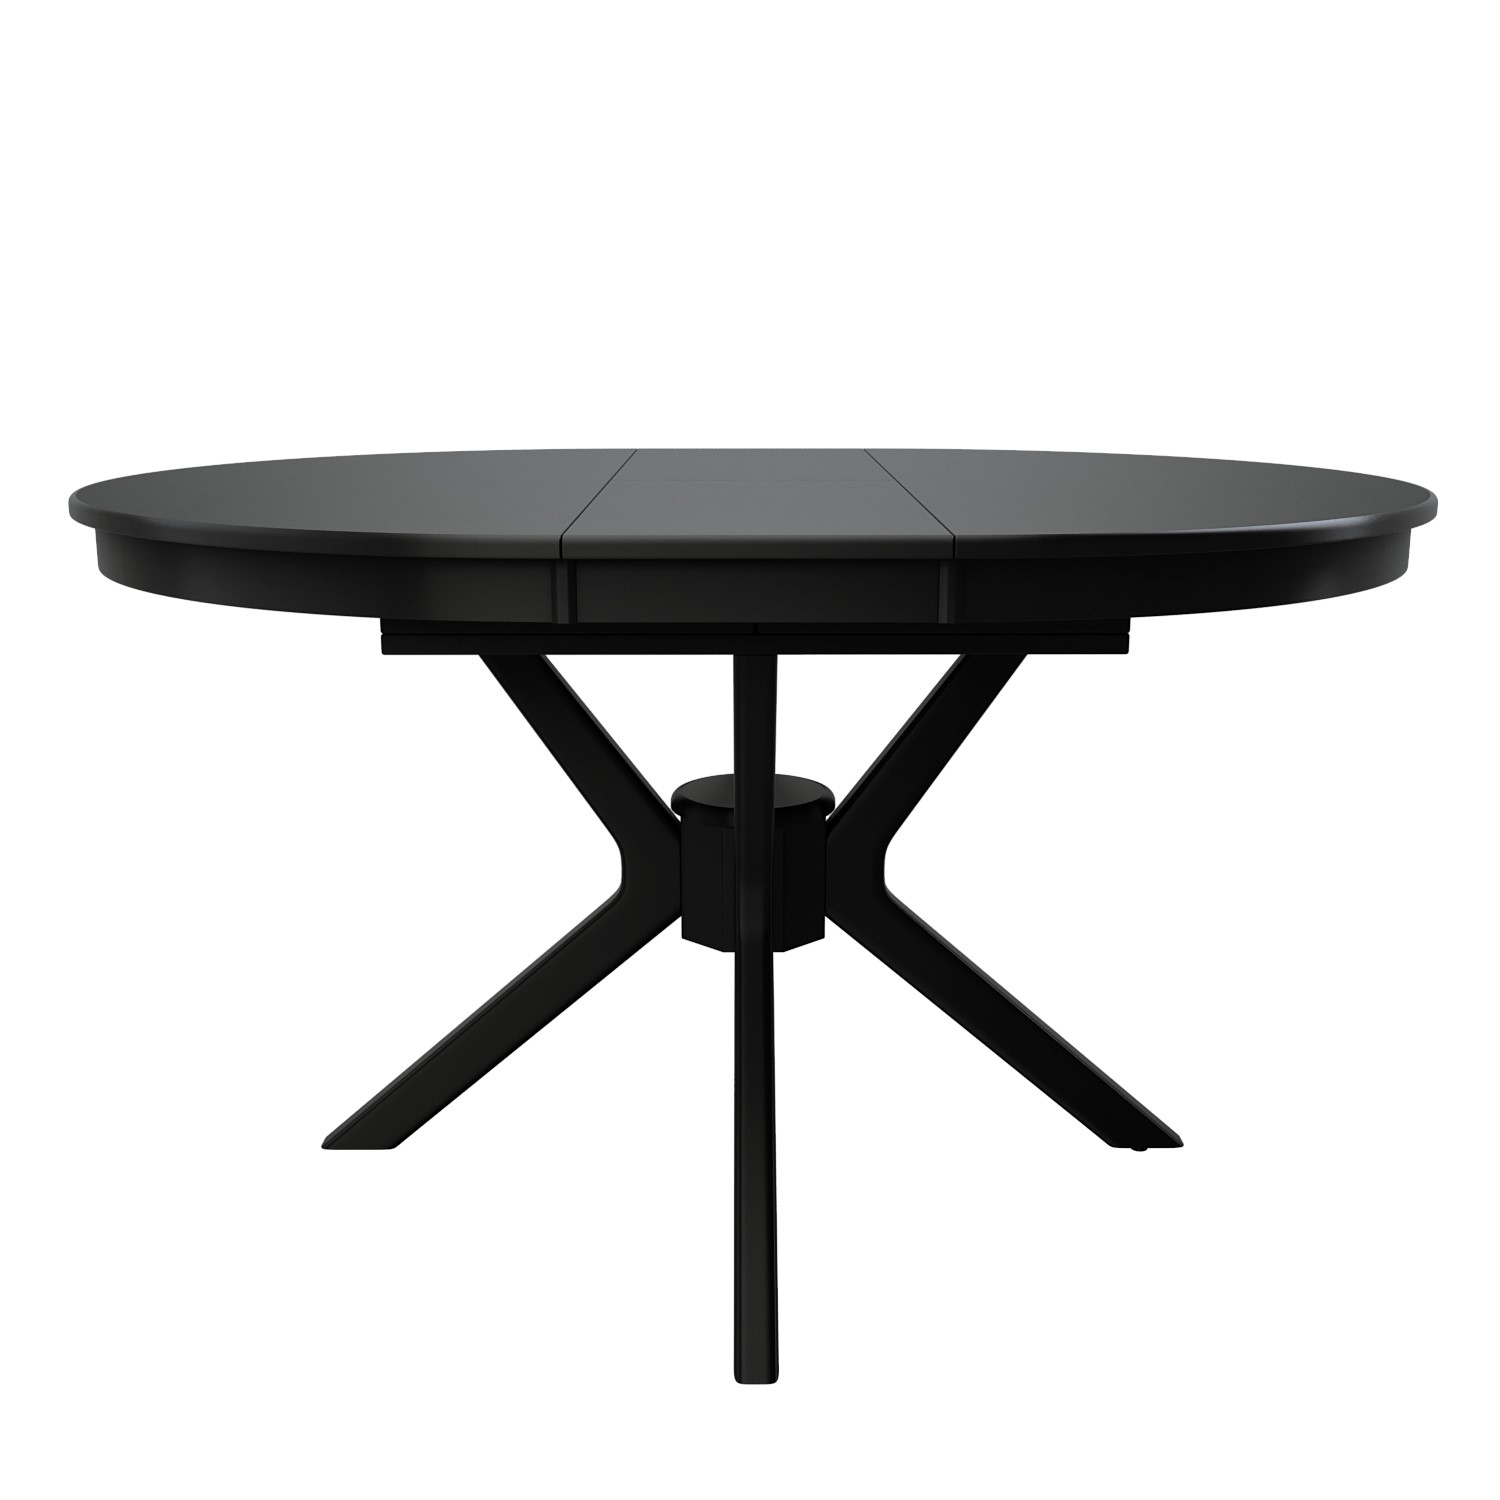 Photo of Large black extendable round to oval dining table - seats 4-6 - karie